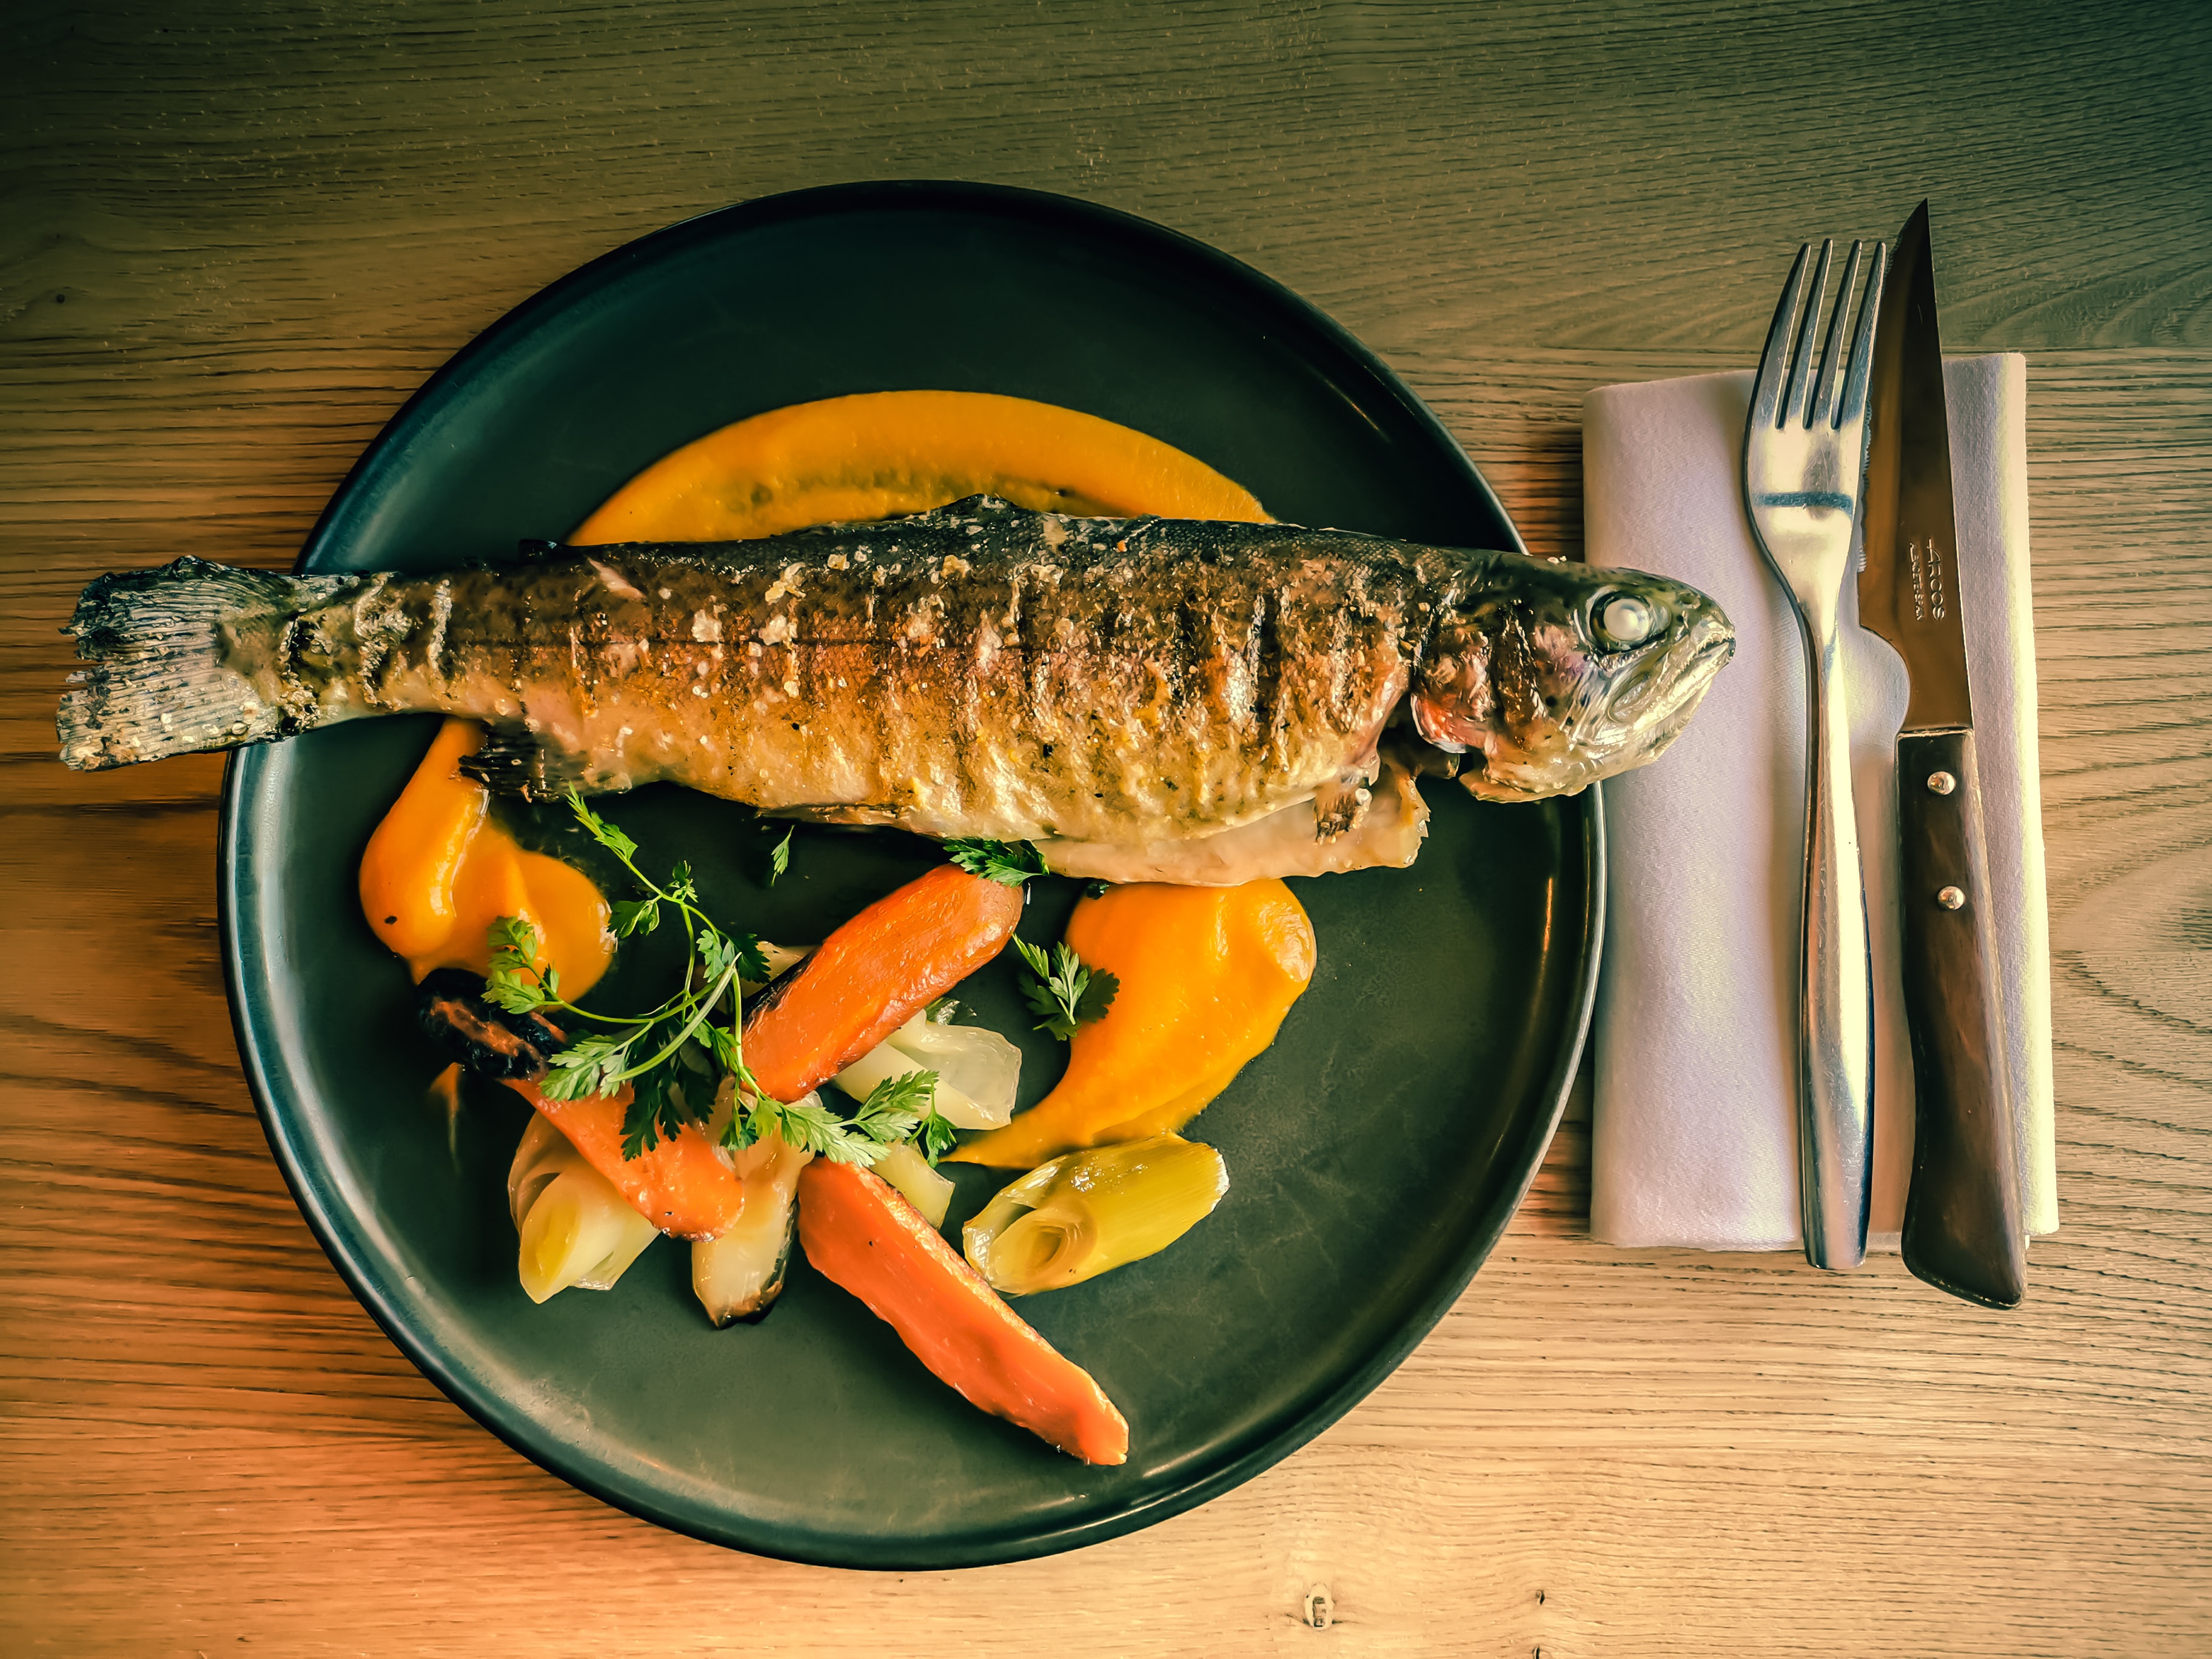 Where to find the best fish in Portugal